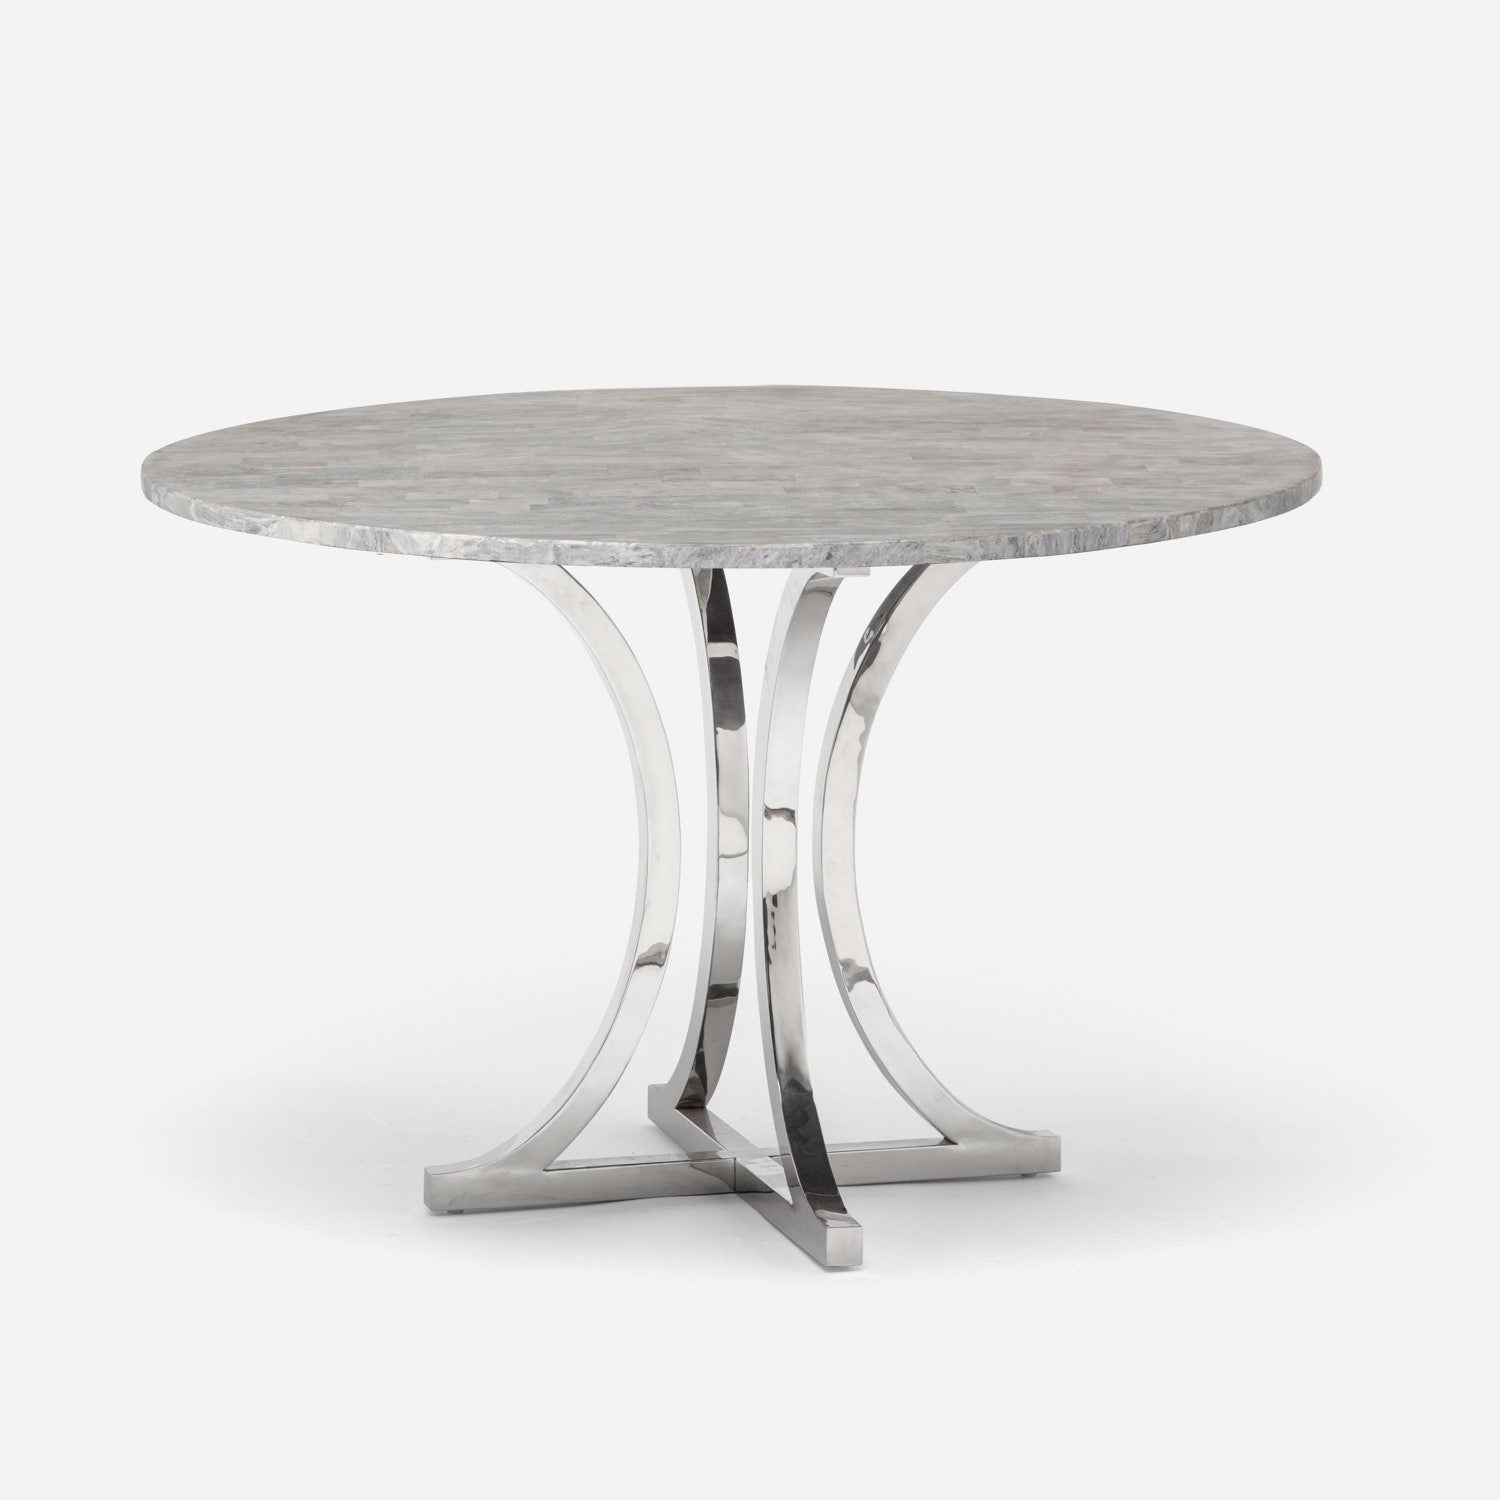 Made Goods Leighton 48" x 30" Polished Silver Steel Dinning Table With Round Gray Romblon Stone Table Top